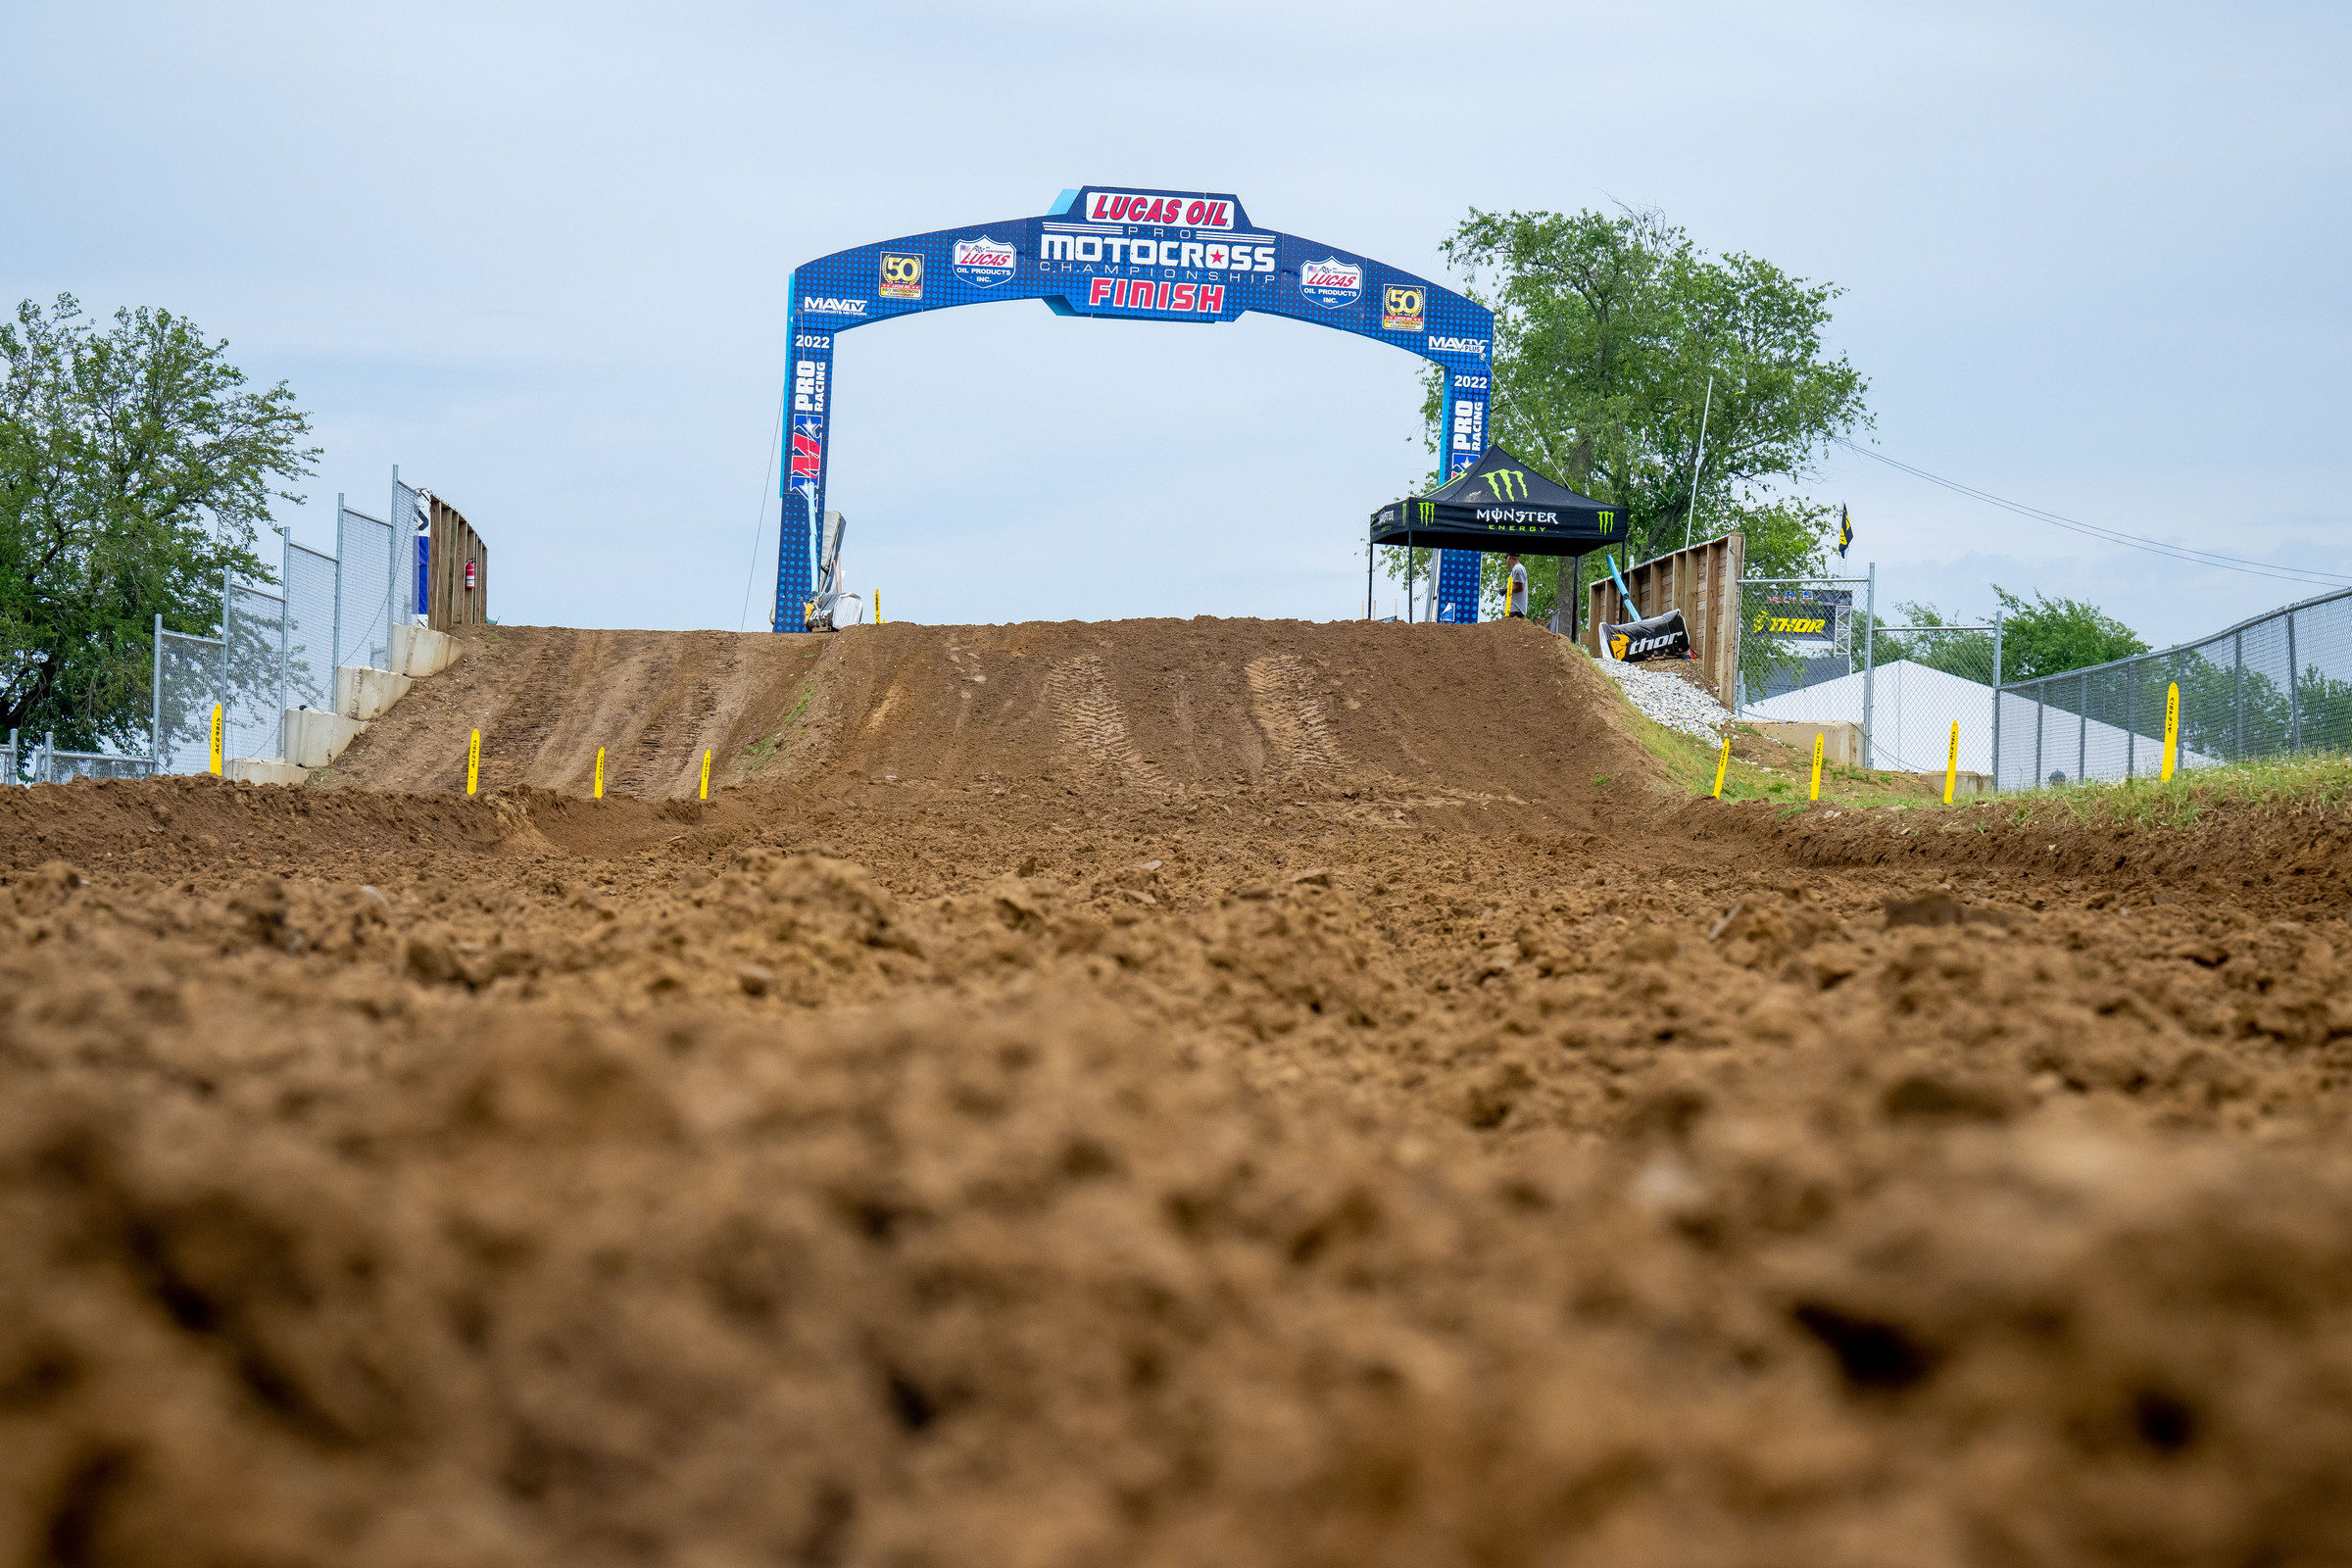 Live Updates from the 2022 RedBud Pro Motocross National